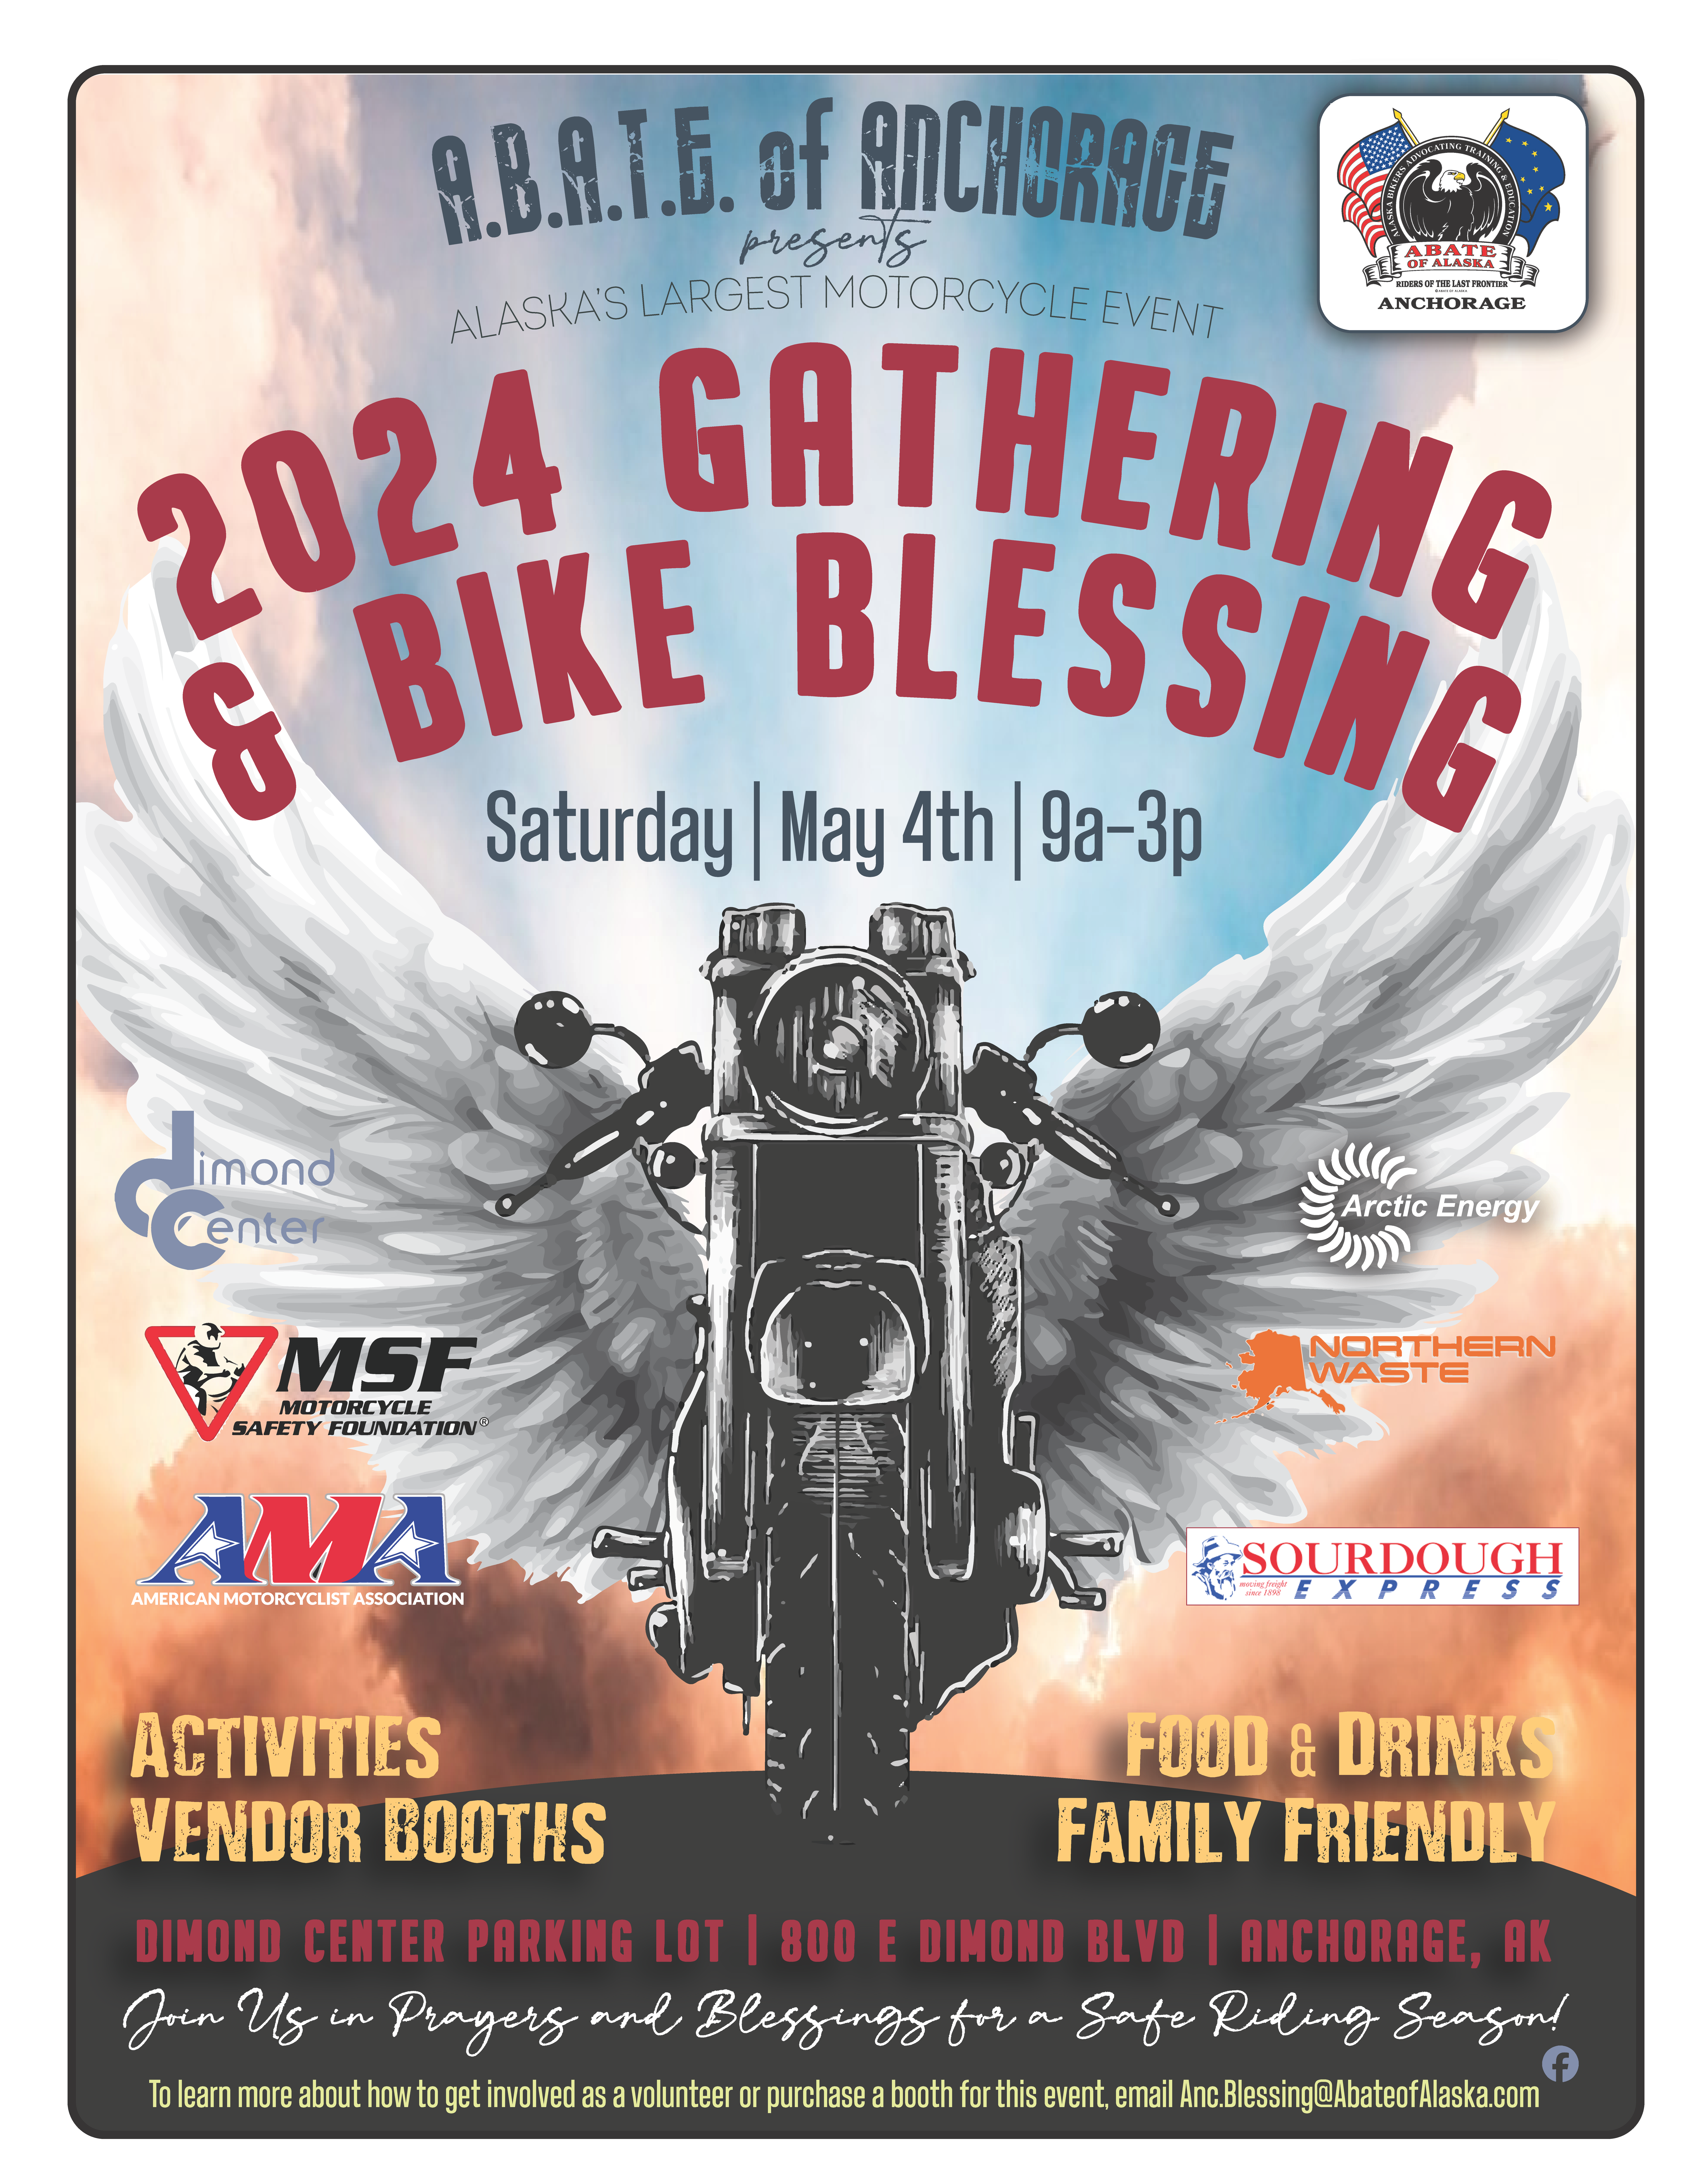 gathering and bike blessing poster